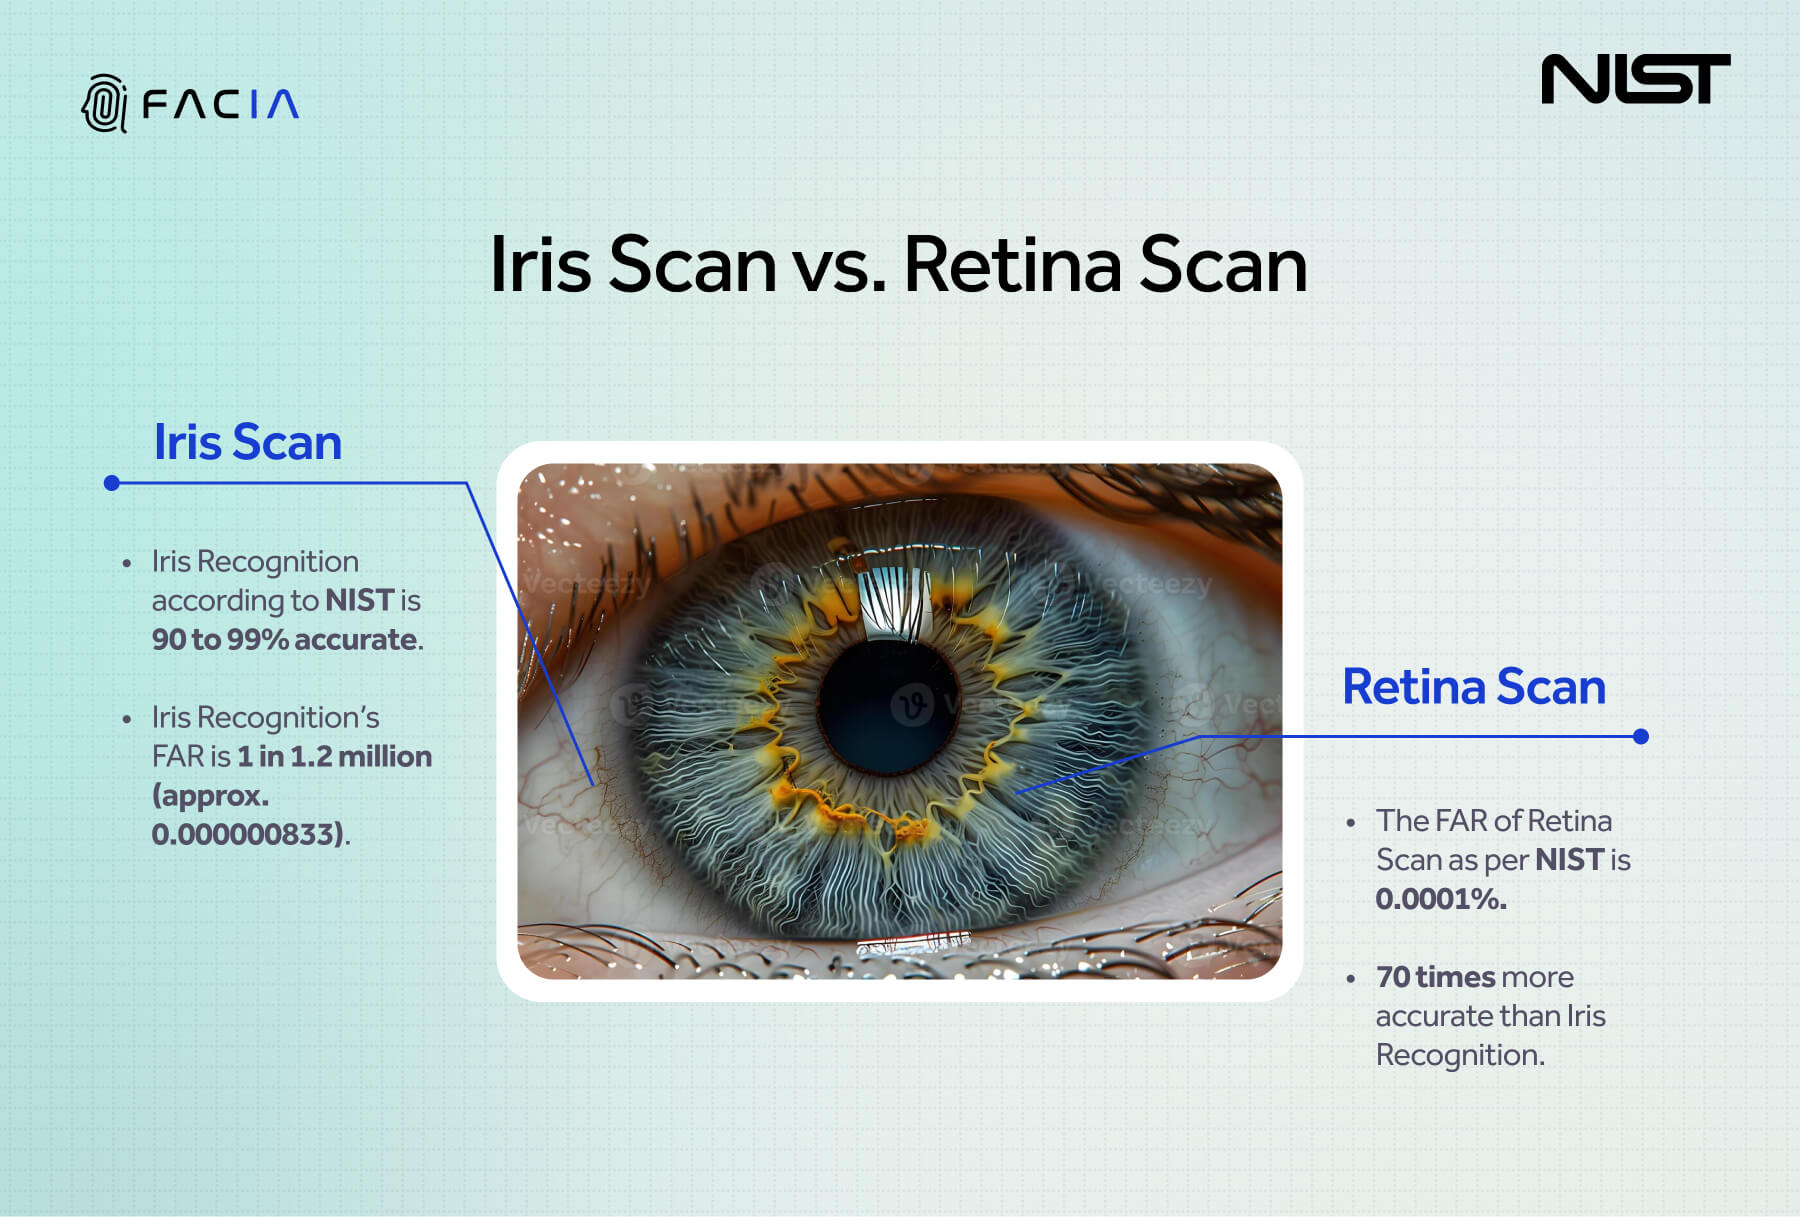 This image explains Iris recognition and Retina scanning distinctively discussing NIST’s benchmark standards of accuracy for both.